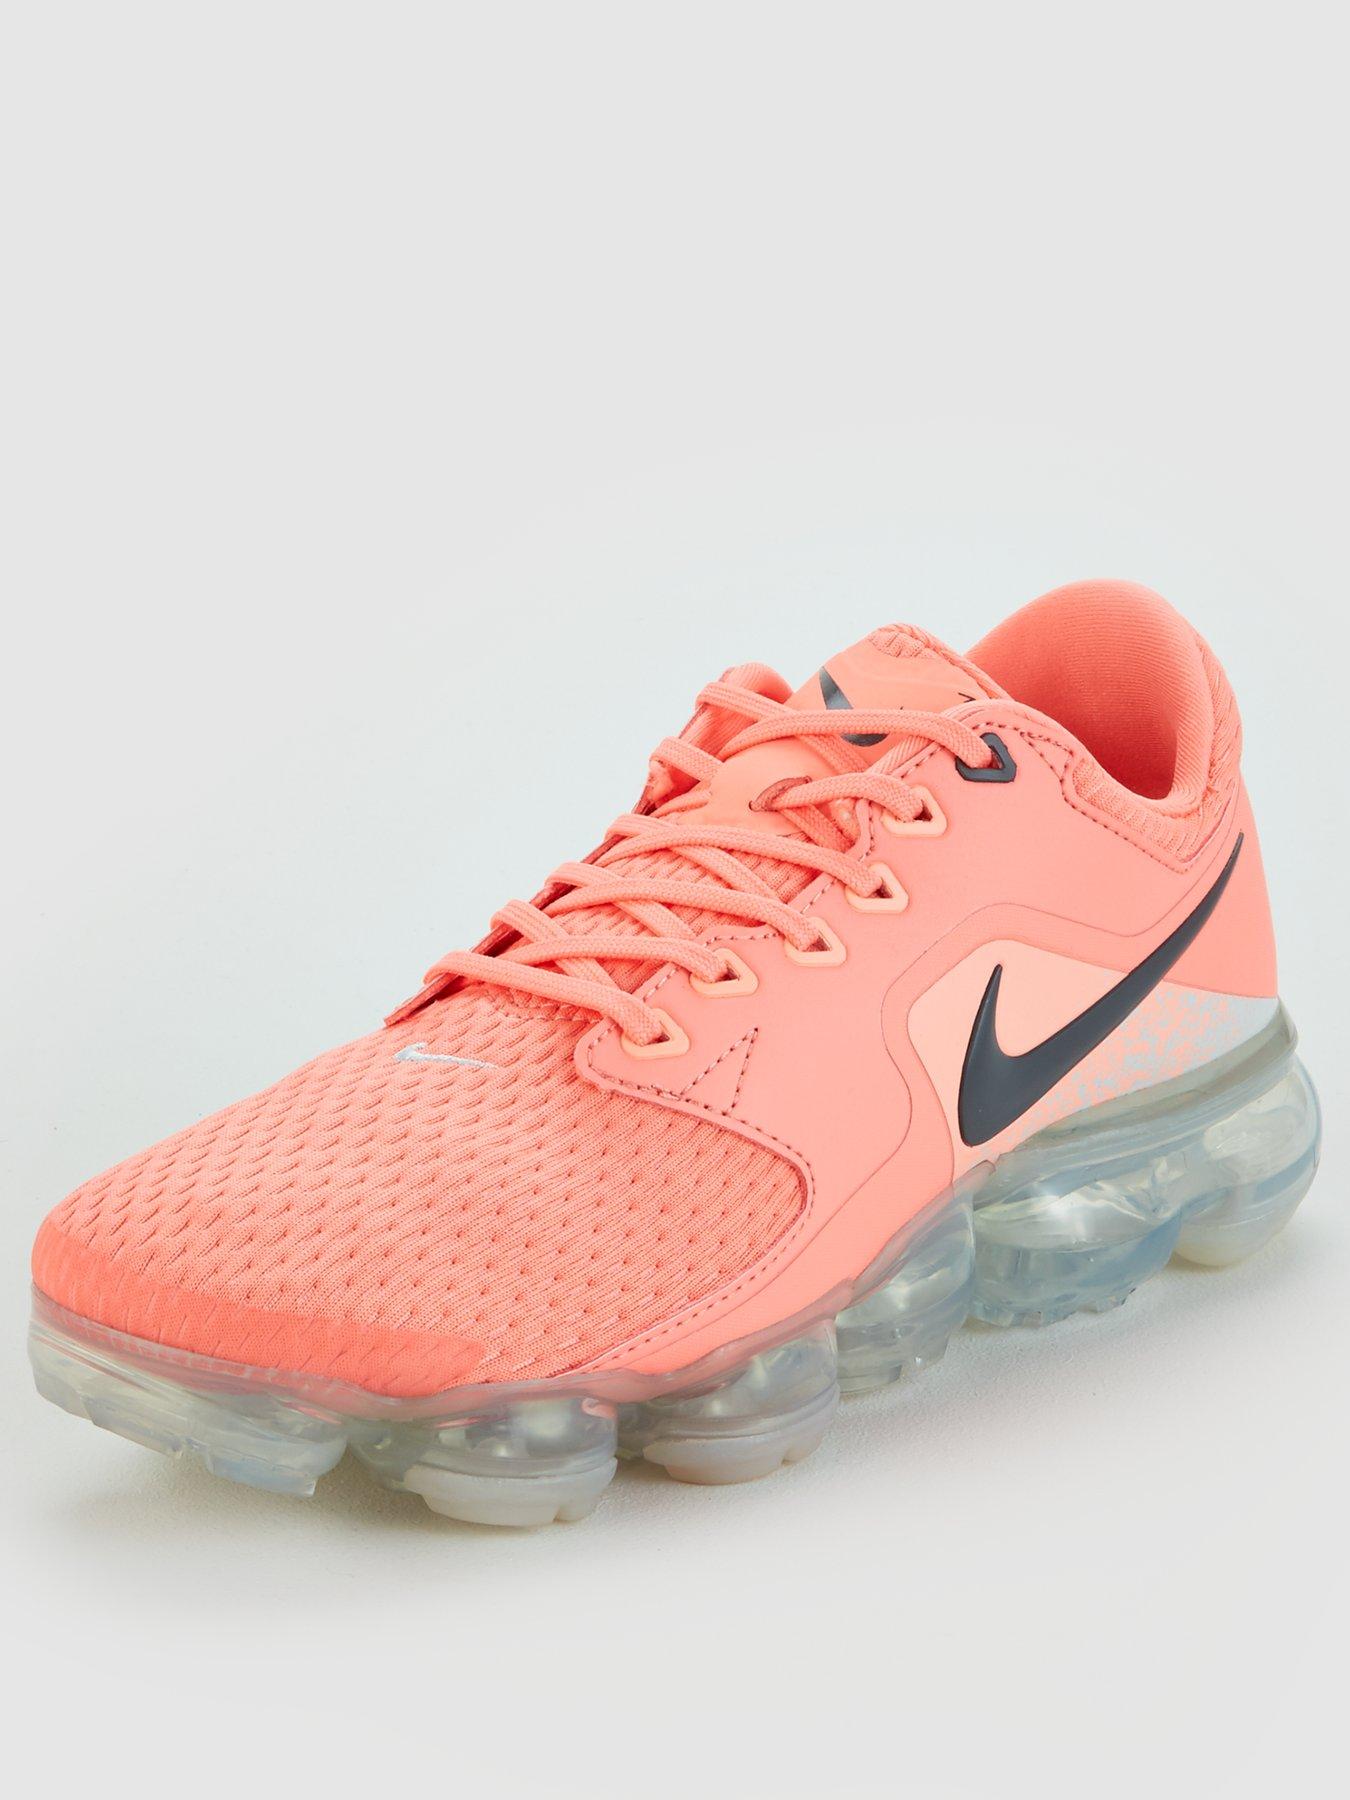 vapormax pay monthly cheap online